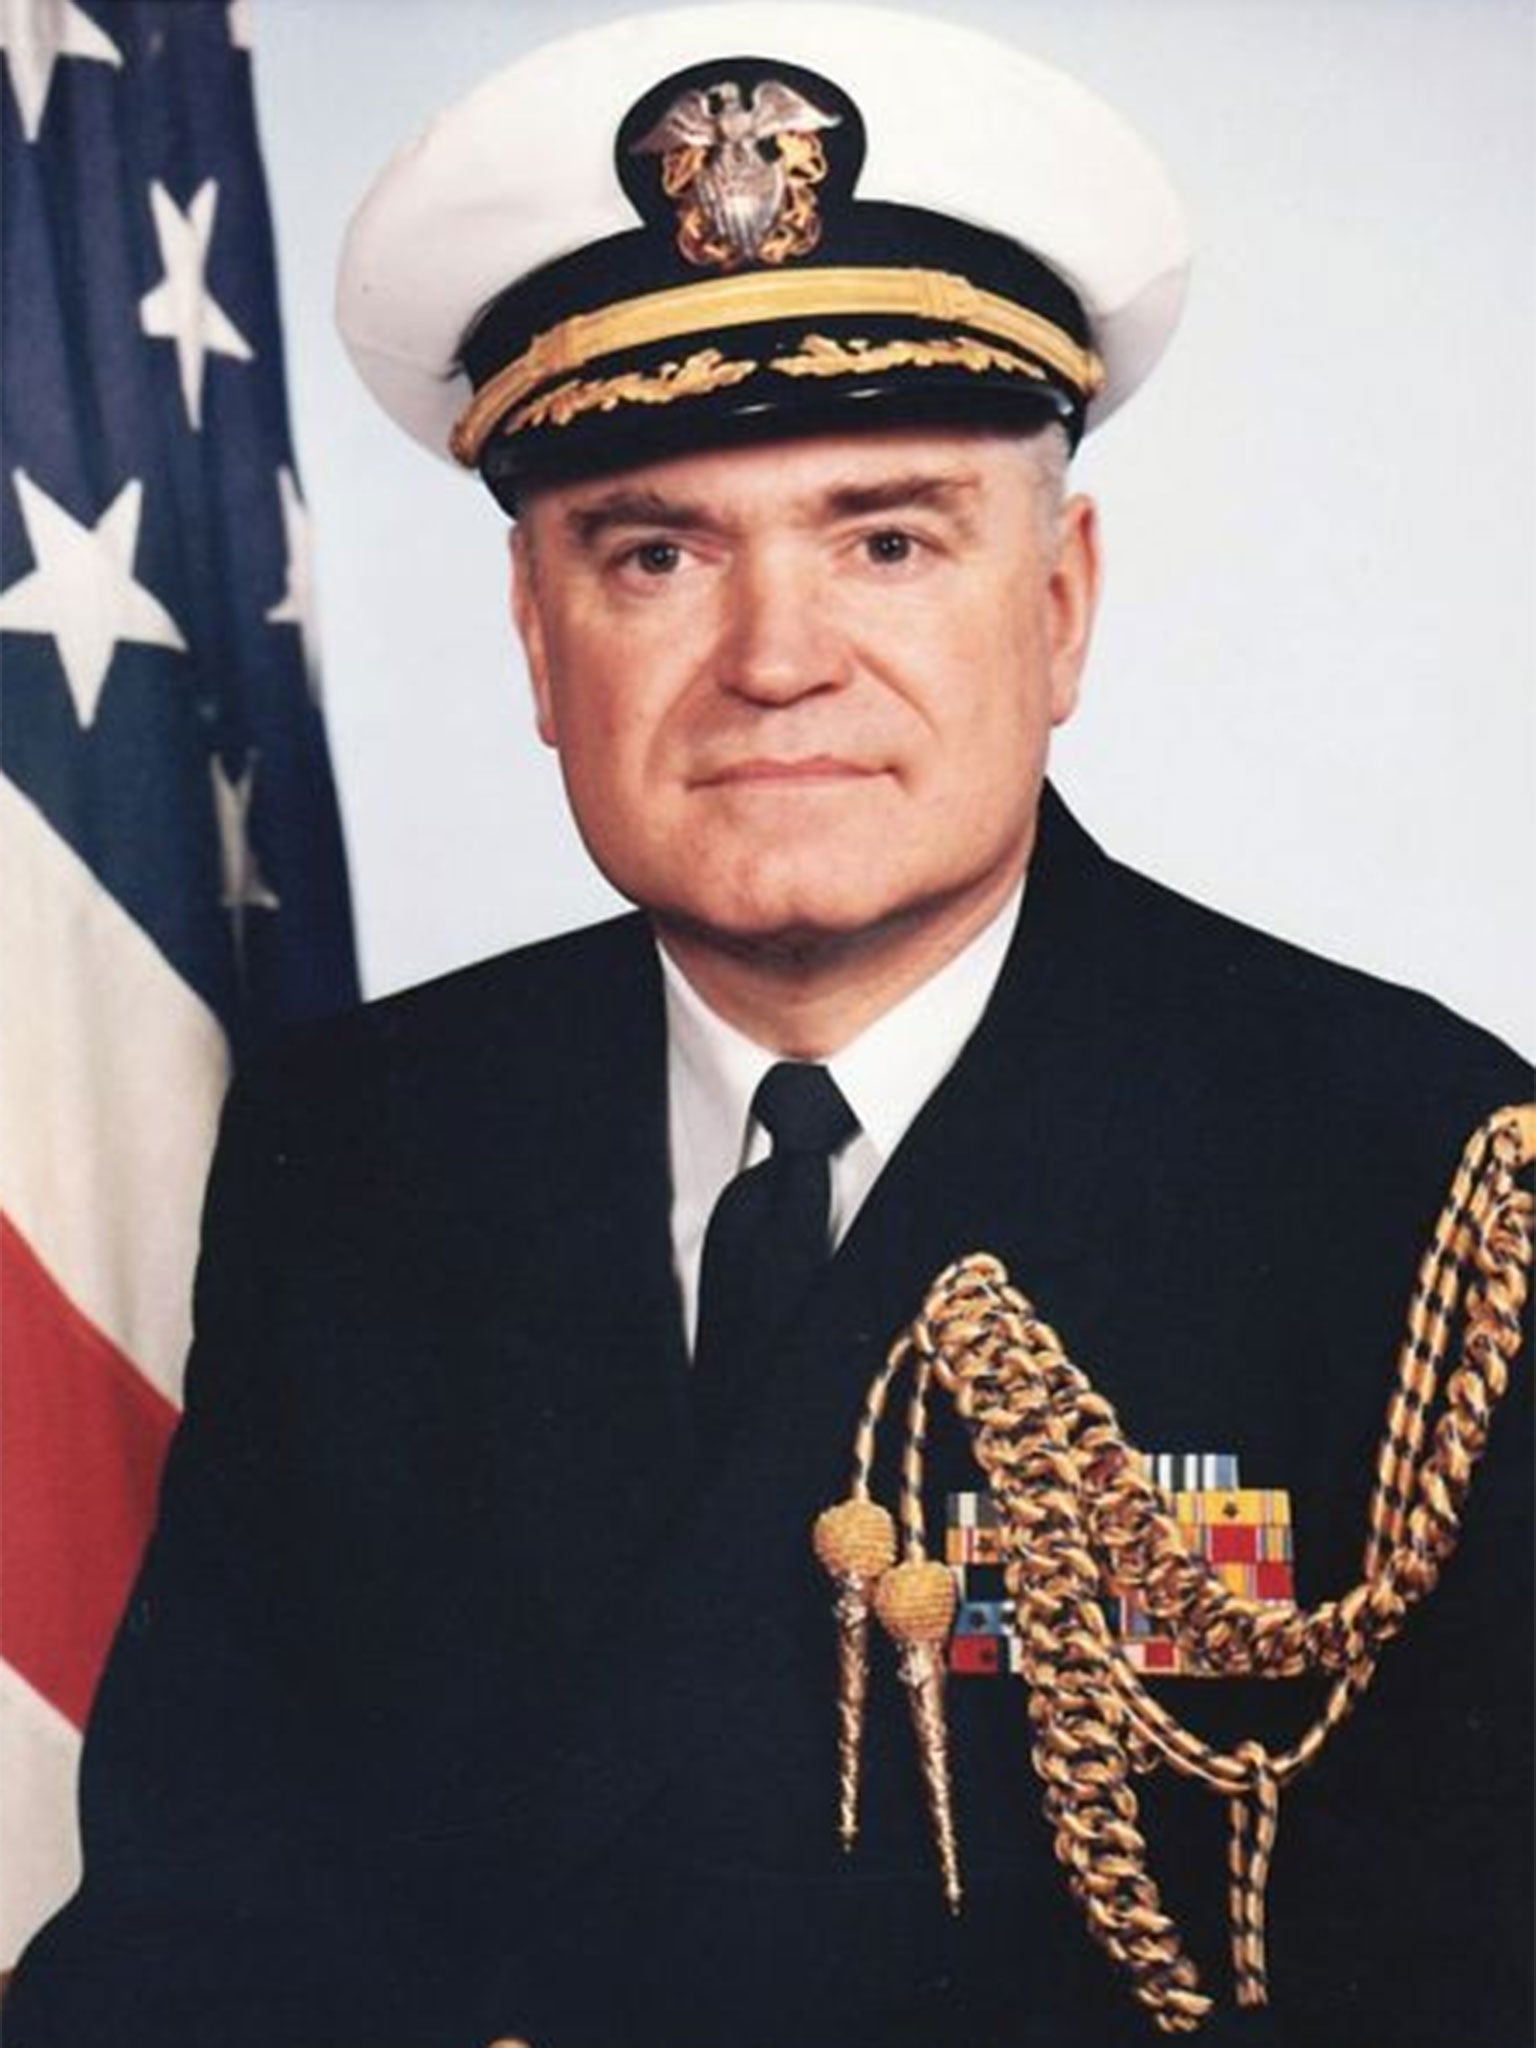 Victor Delano, a US Navy captain who helped rally fellow sailors during the attack on Pearl Harbour